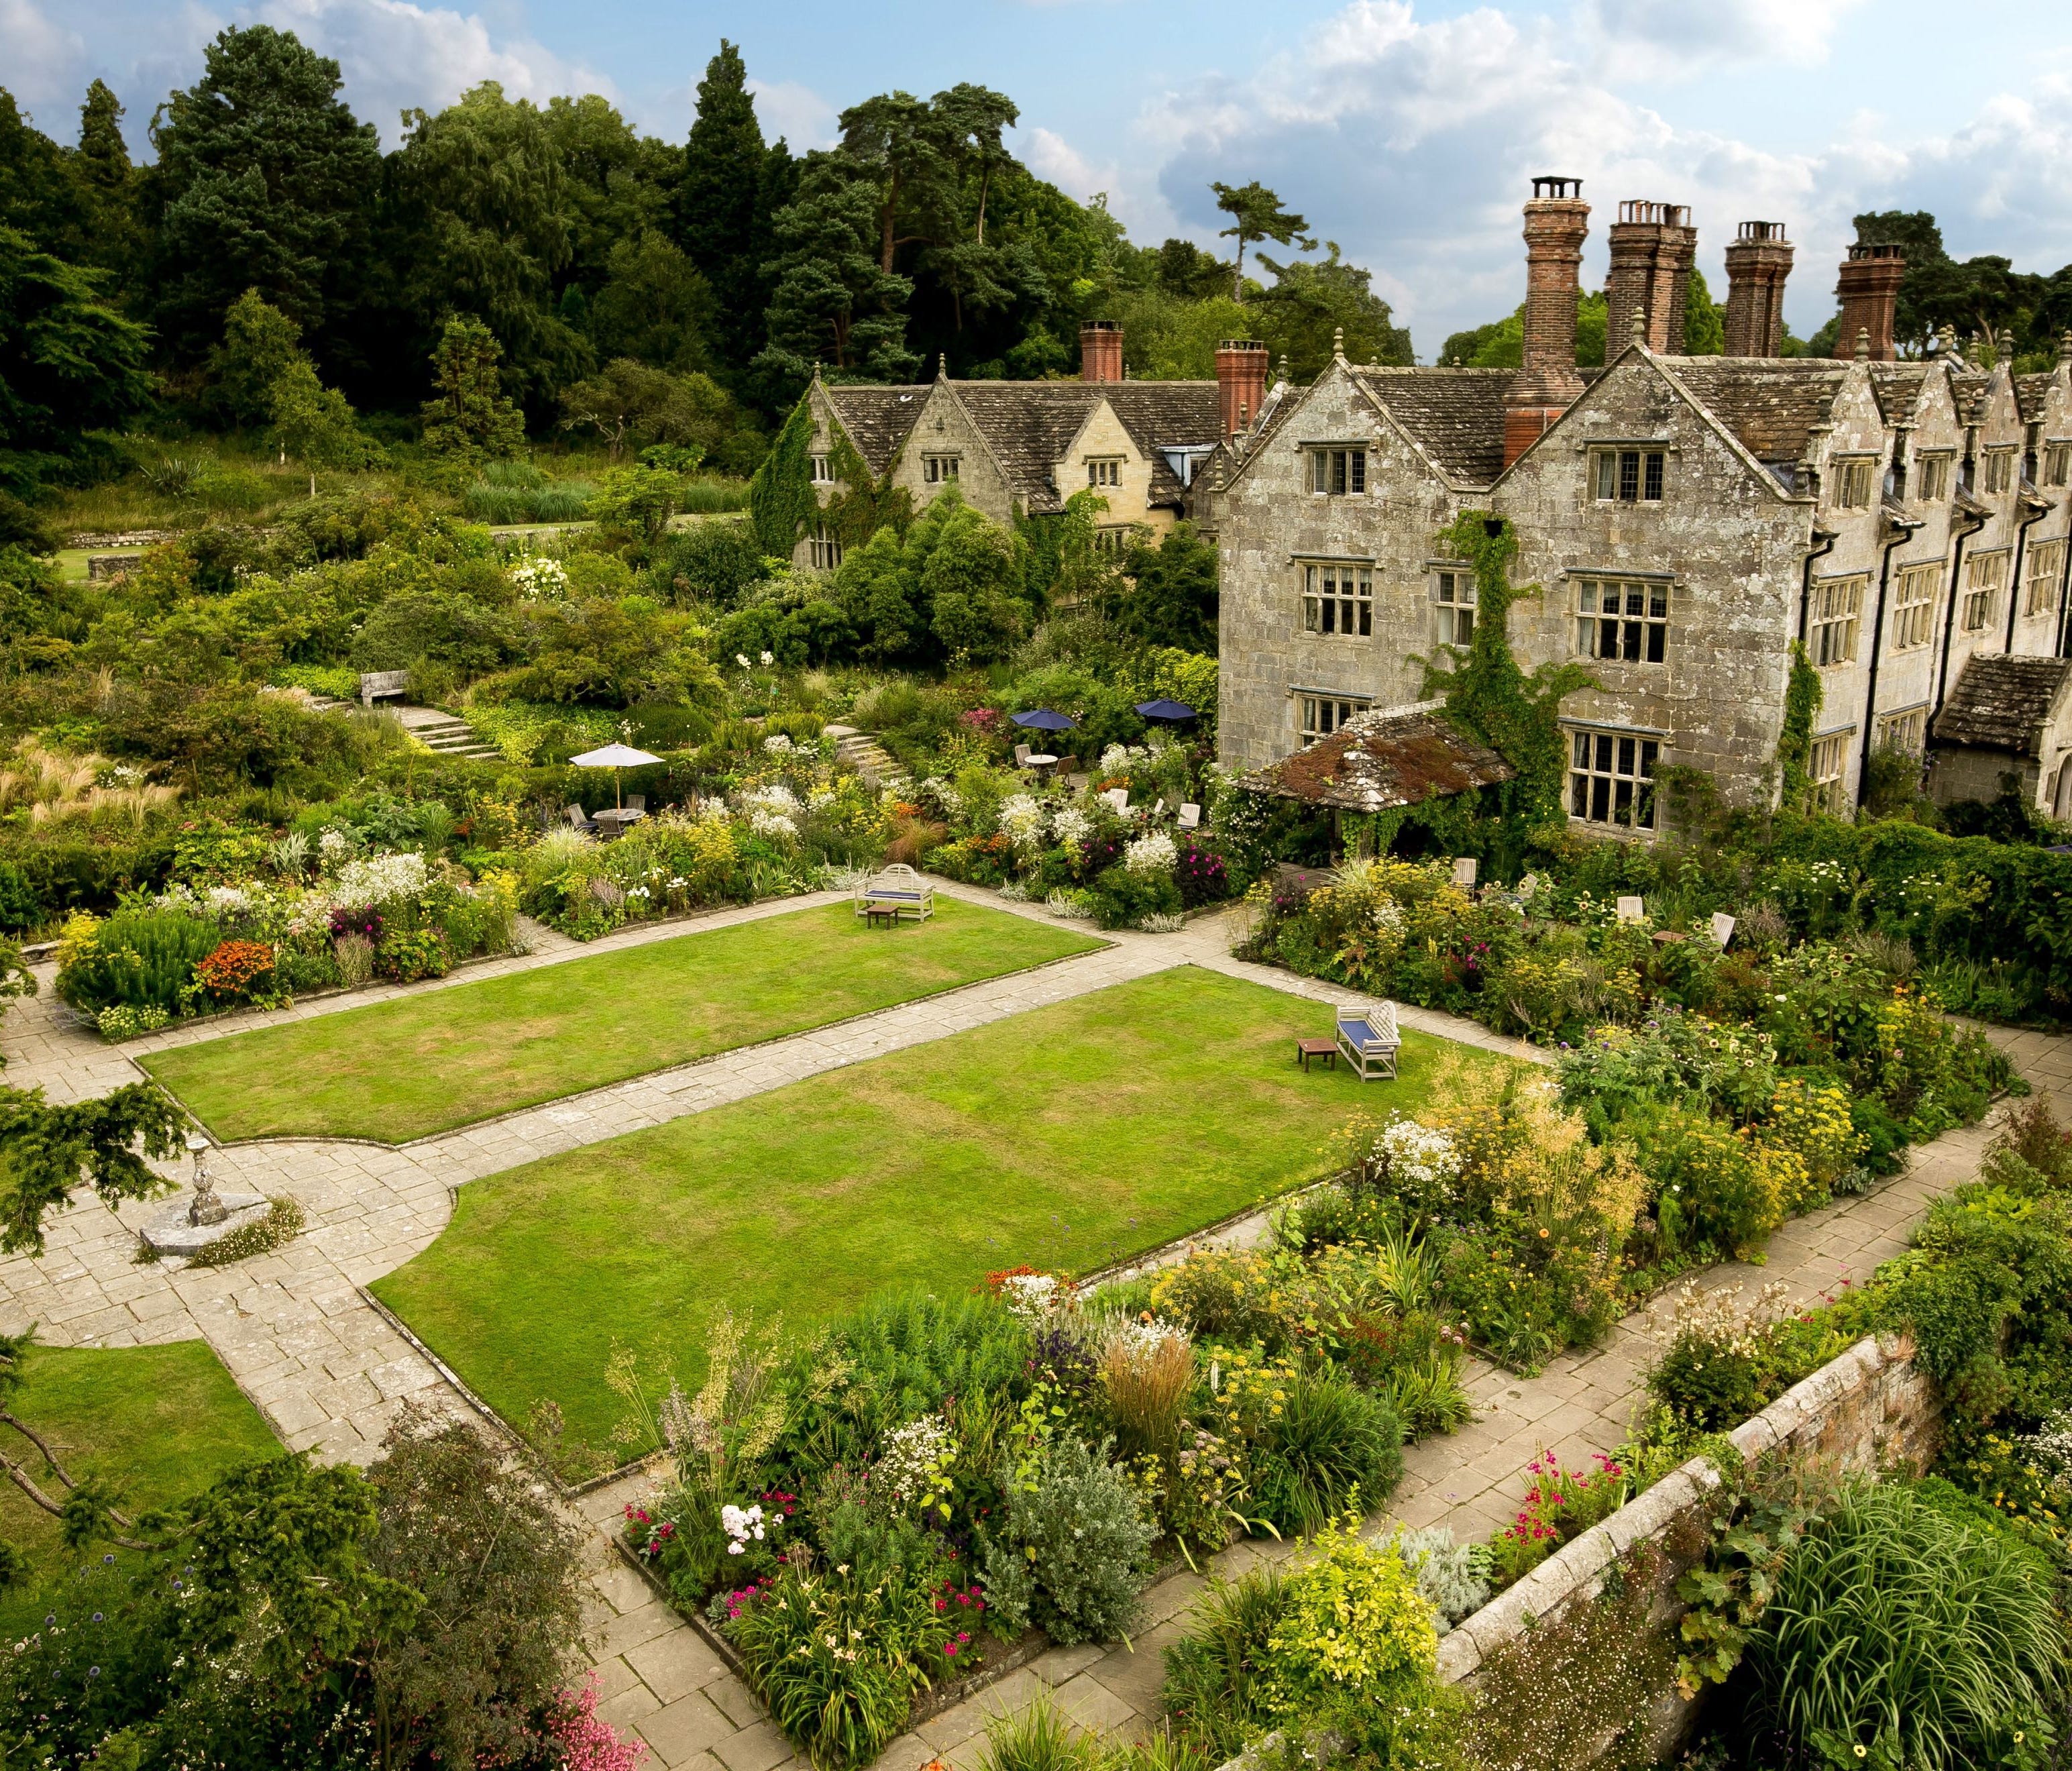 Gravetye Manor, East Grinstead, Sussex: An Elizabethan stone manor house built by an ironmaster for his bride, Gravetye was home from 1884 to William Robinson, exponent of the natural garden style. 